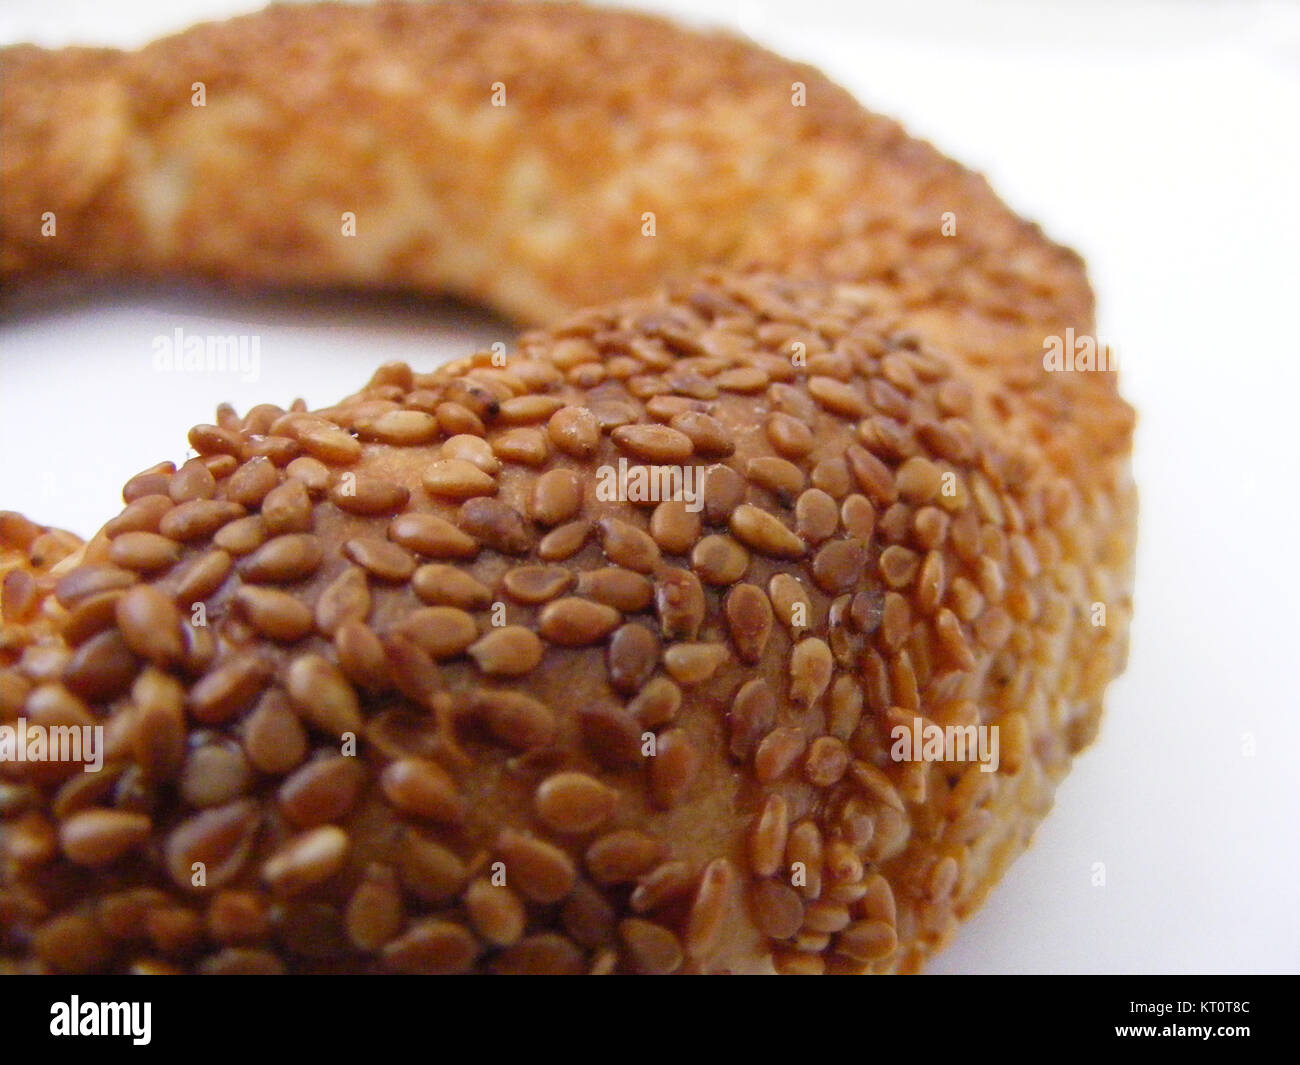 simit,Pretzels, pie and pastry pictures Stock Photo